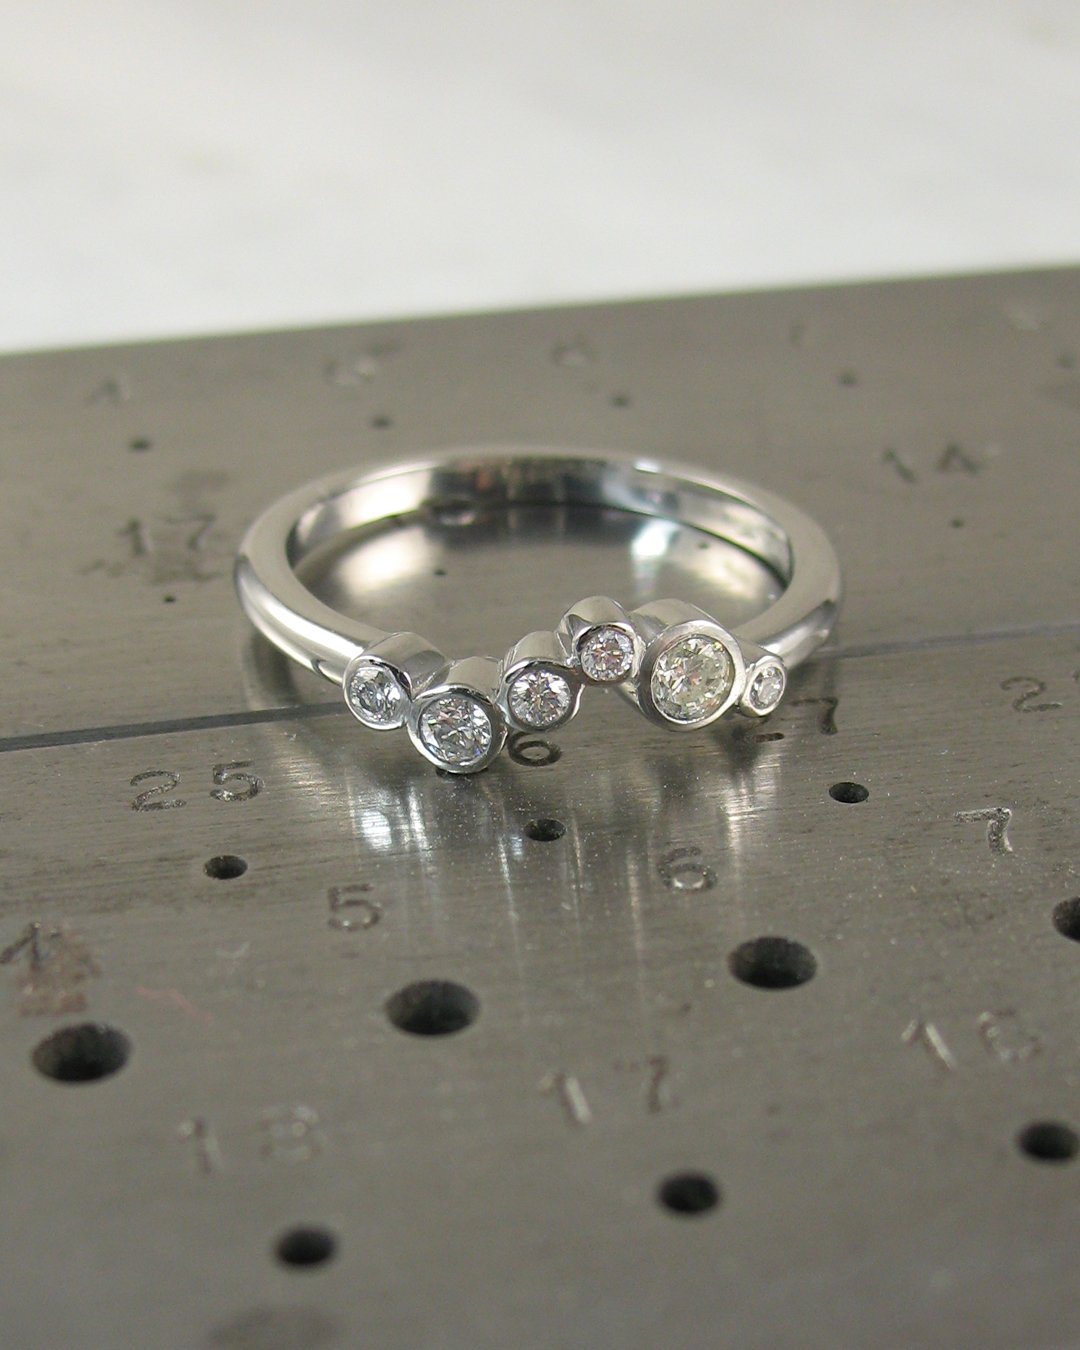 A dazzling diamond scatter ring